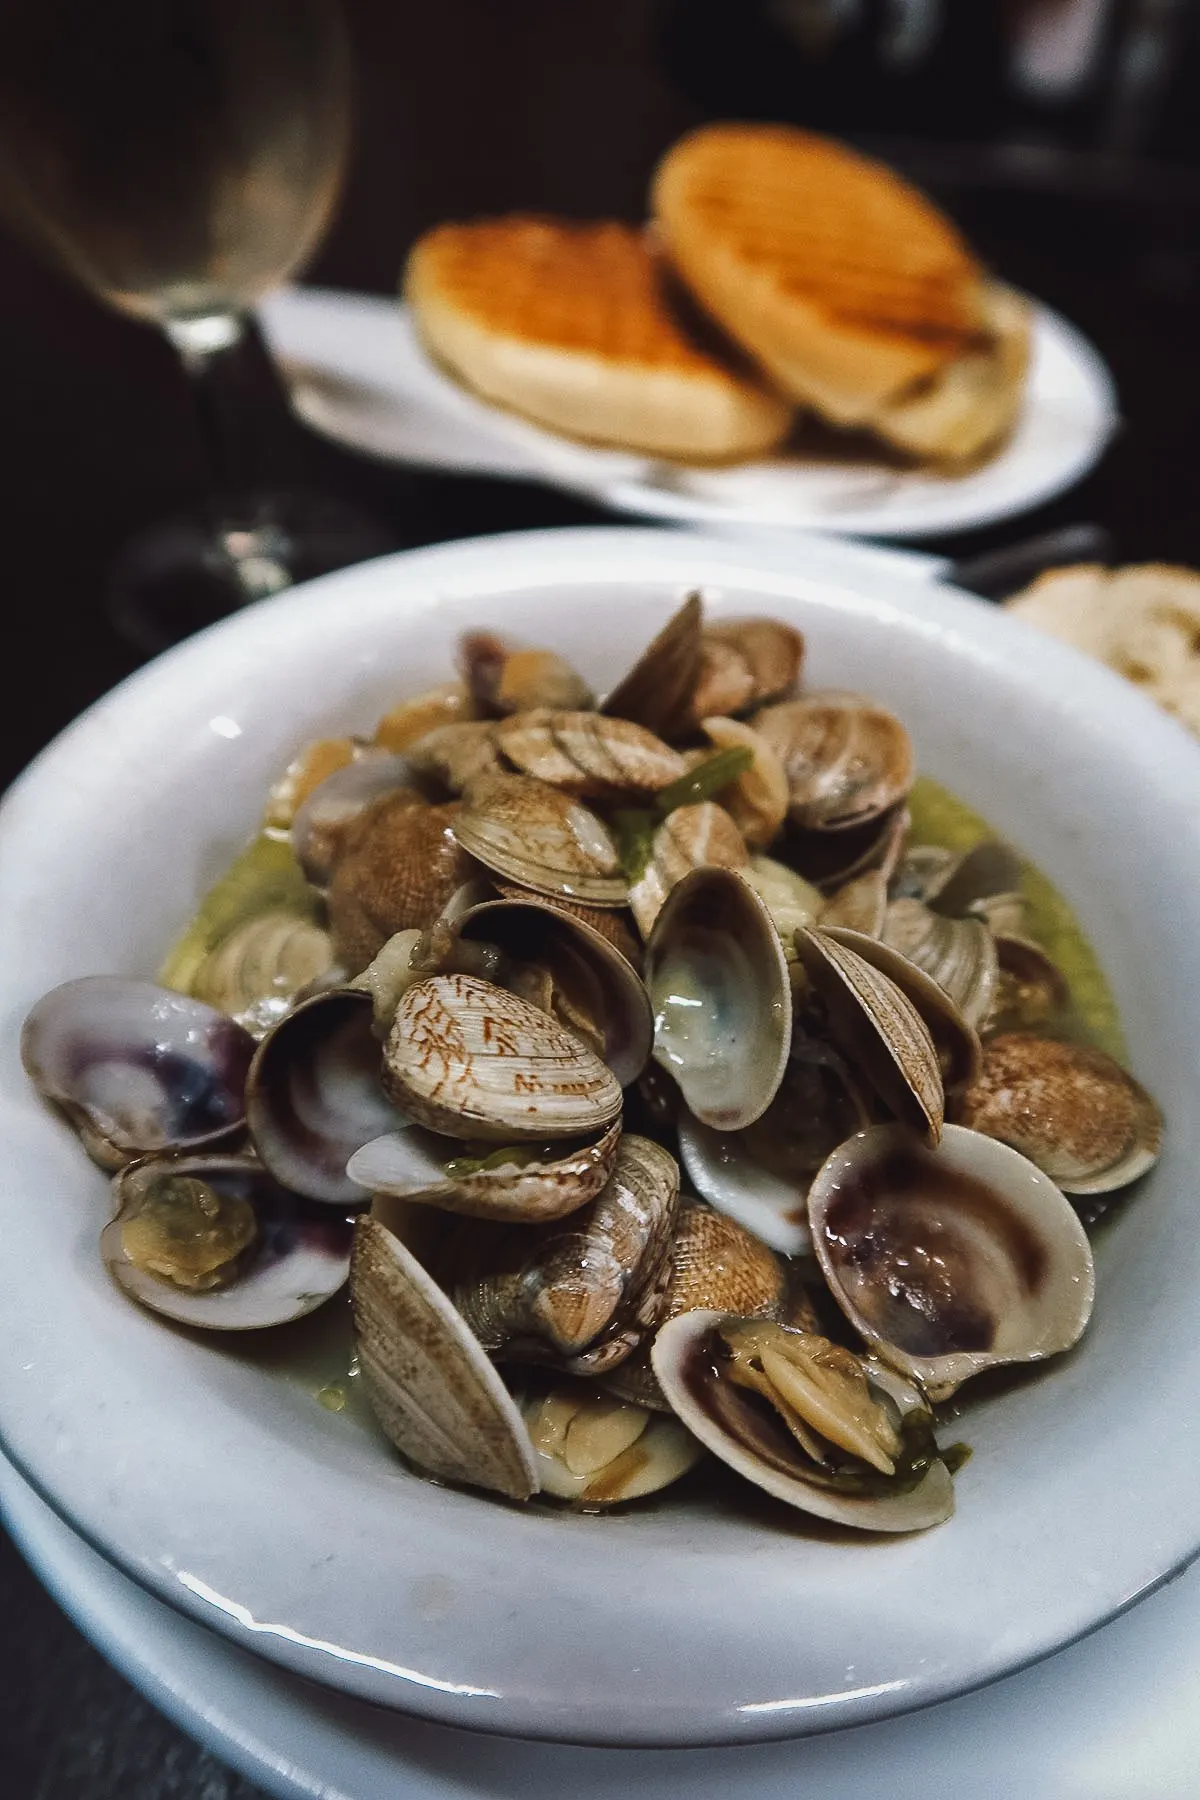 Clams at a restaurant in Seville